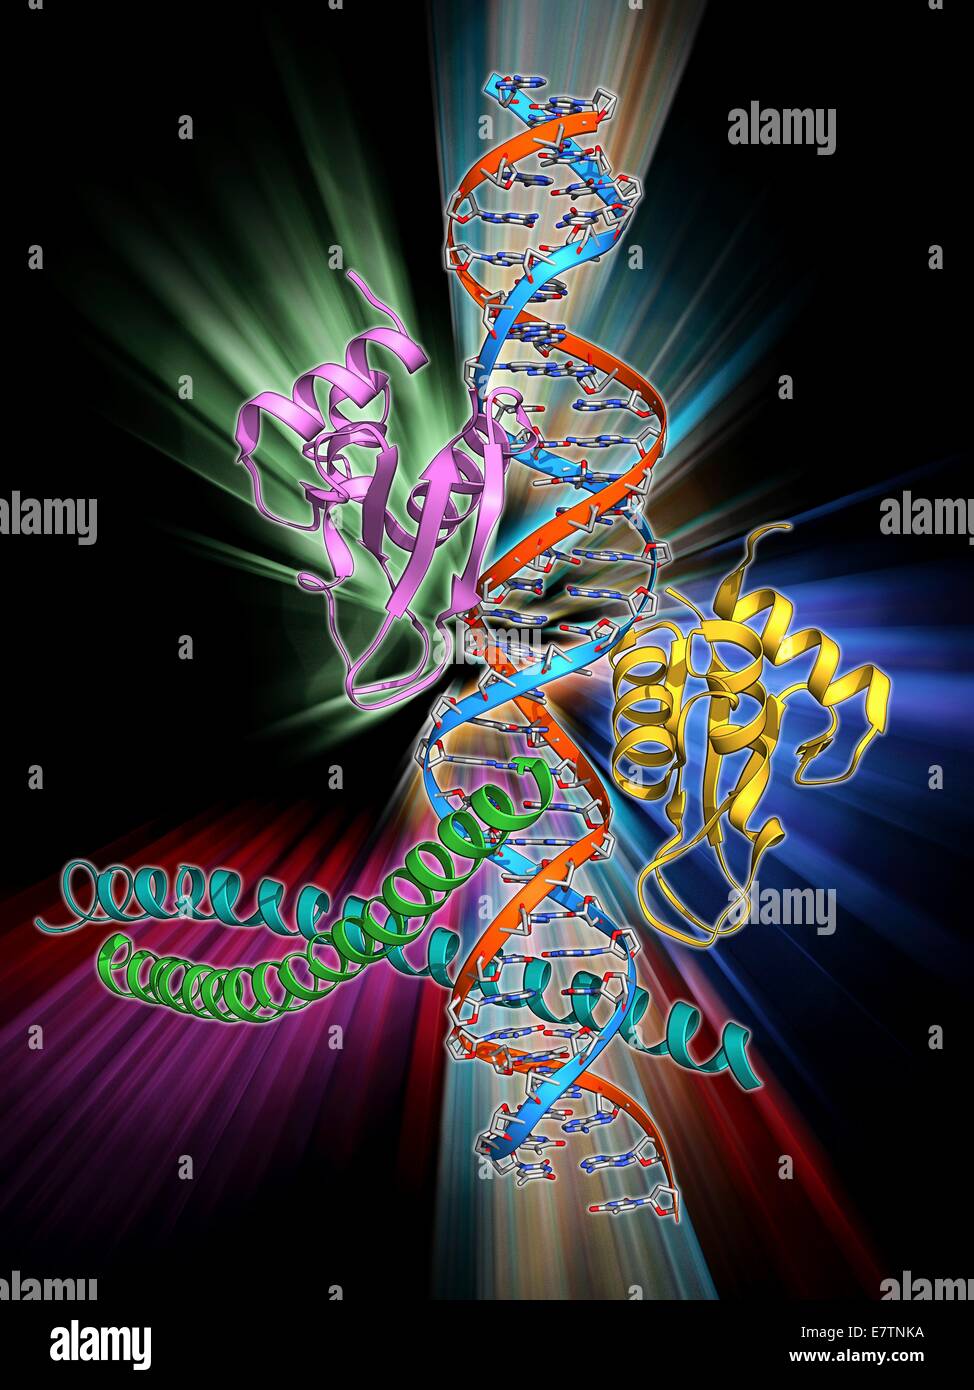 Transcription activation of IFN-beta gene. Molecular model of an enhanceosome containing the transcription factors IRF-3, ATF-2 and c-Jun bound to the interferon-beta (IFN-beta) enhancer on a strand of DNA (deoxyribonucleic acid, red and blue). Activation Stock Photo